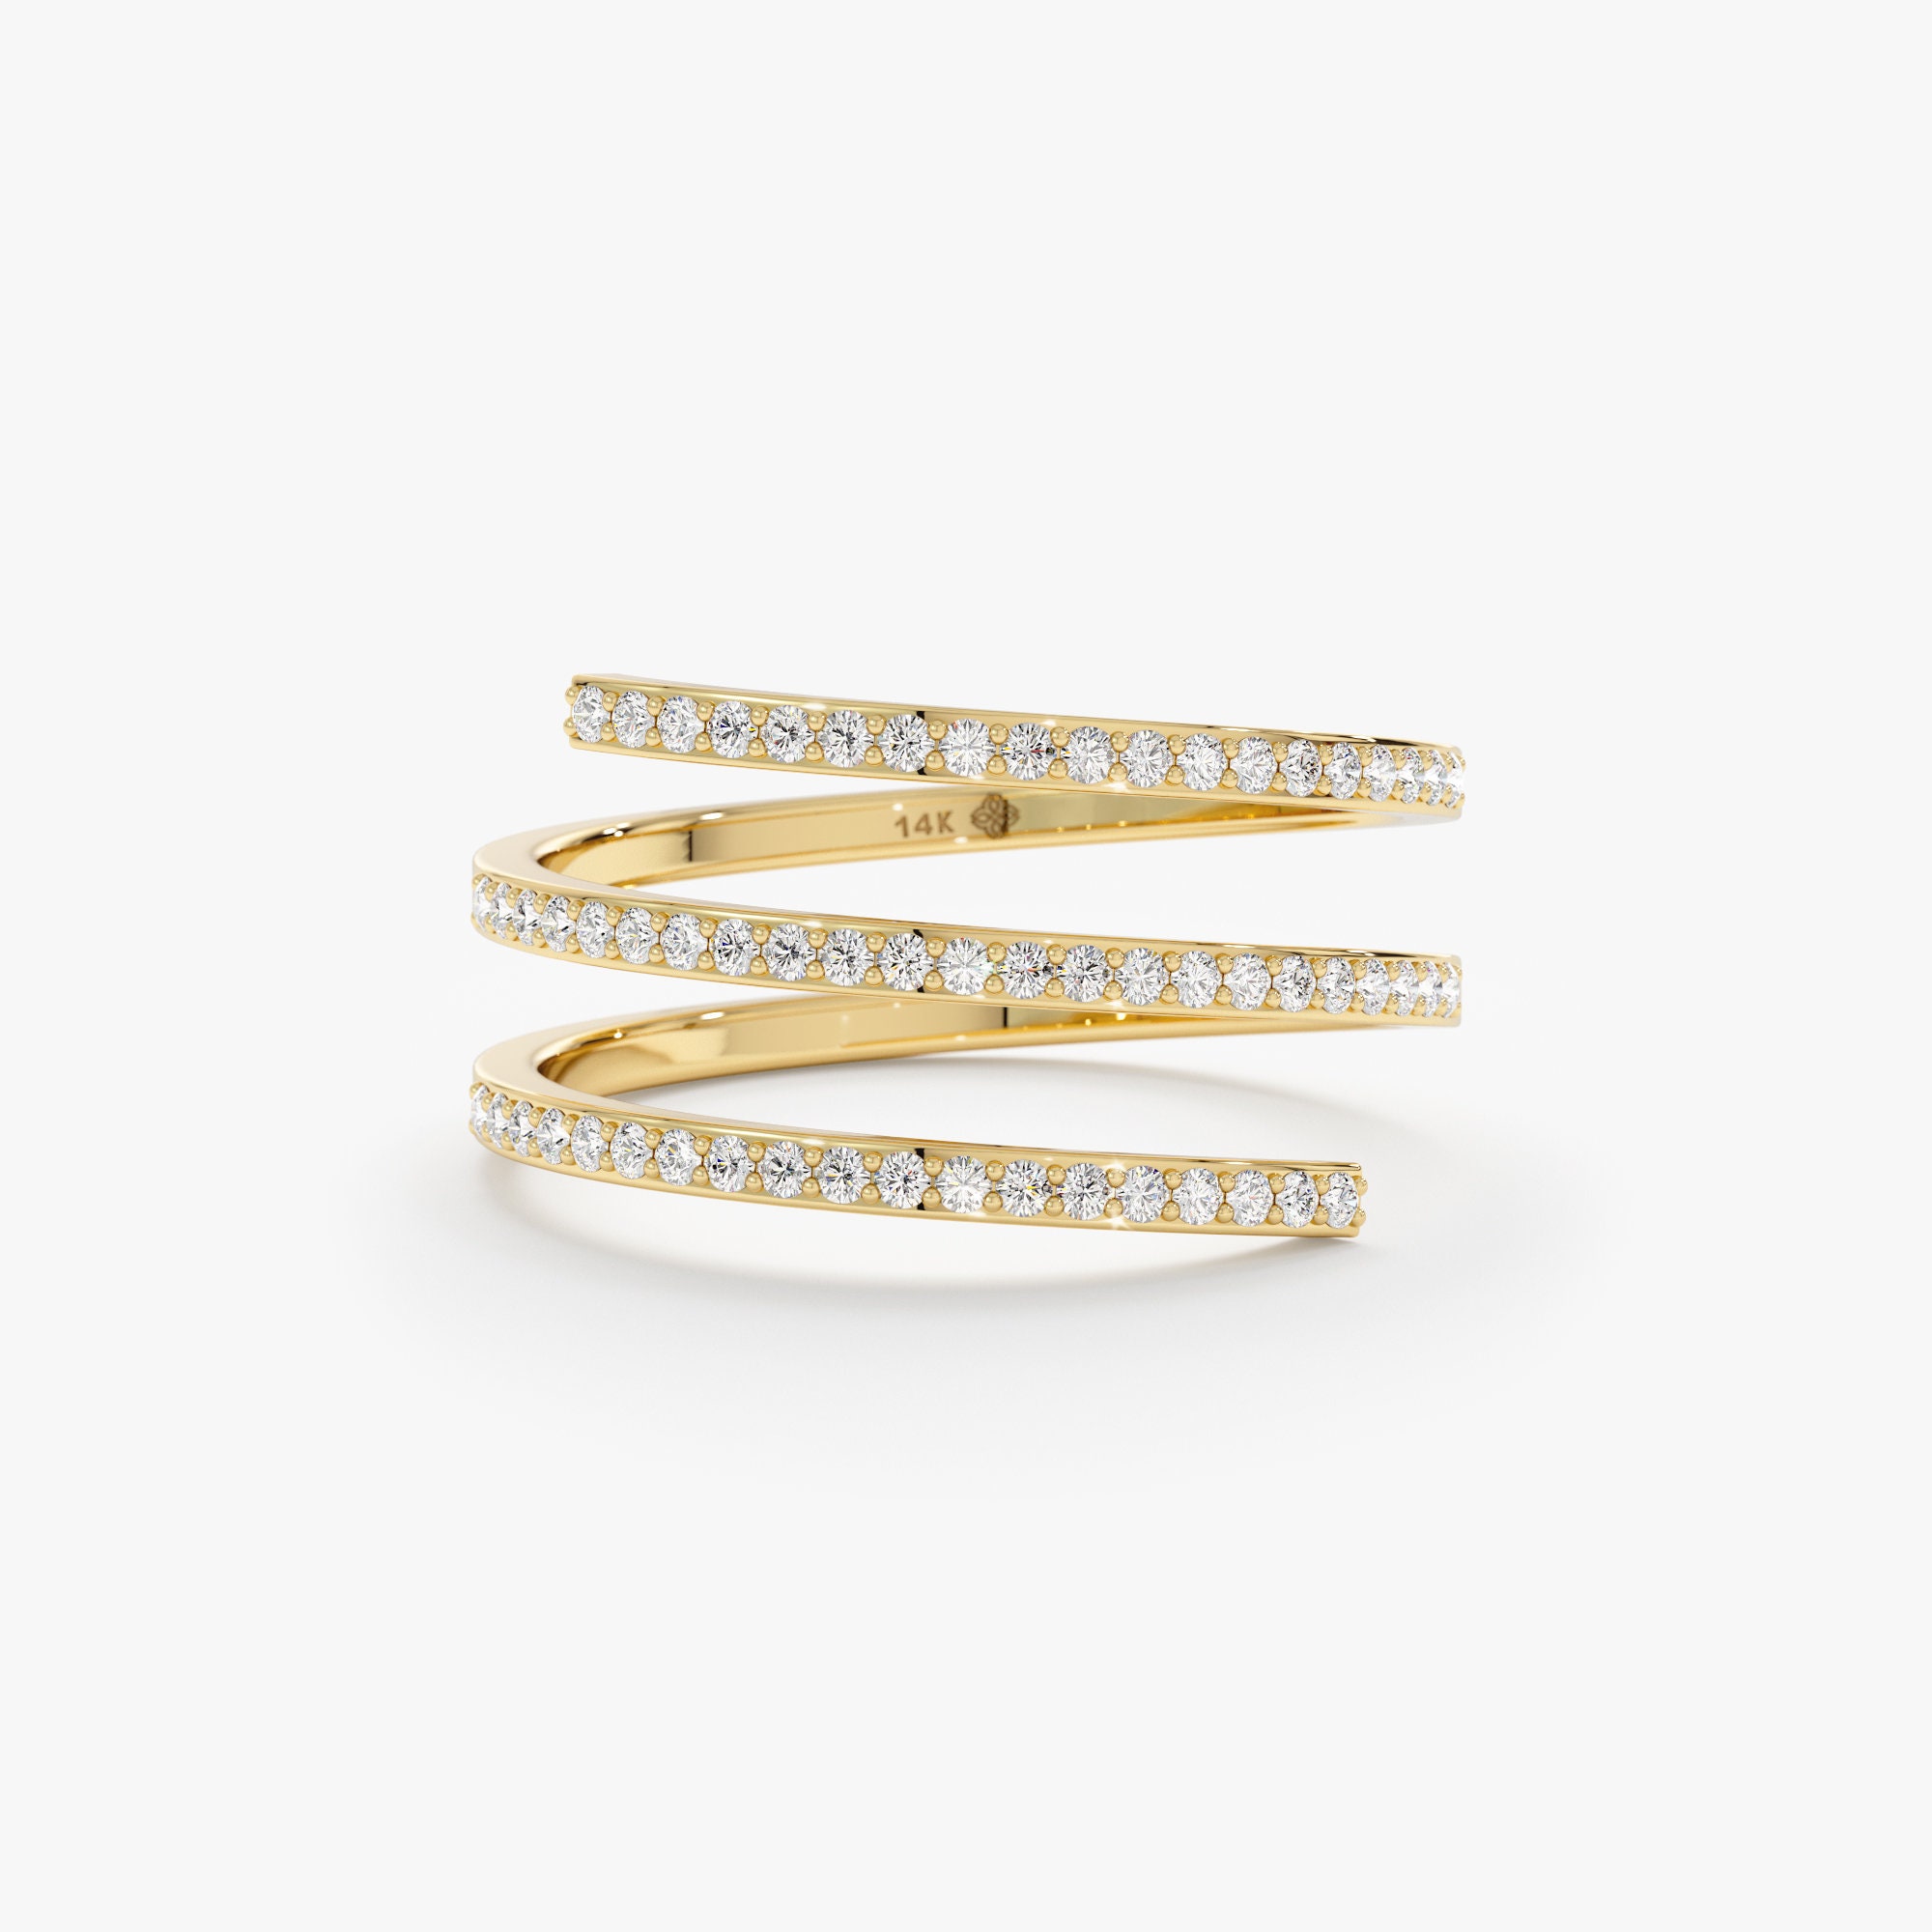 14k Gold Diamond Spiral Ring, Pave Diamonds on Delicate Band